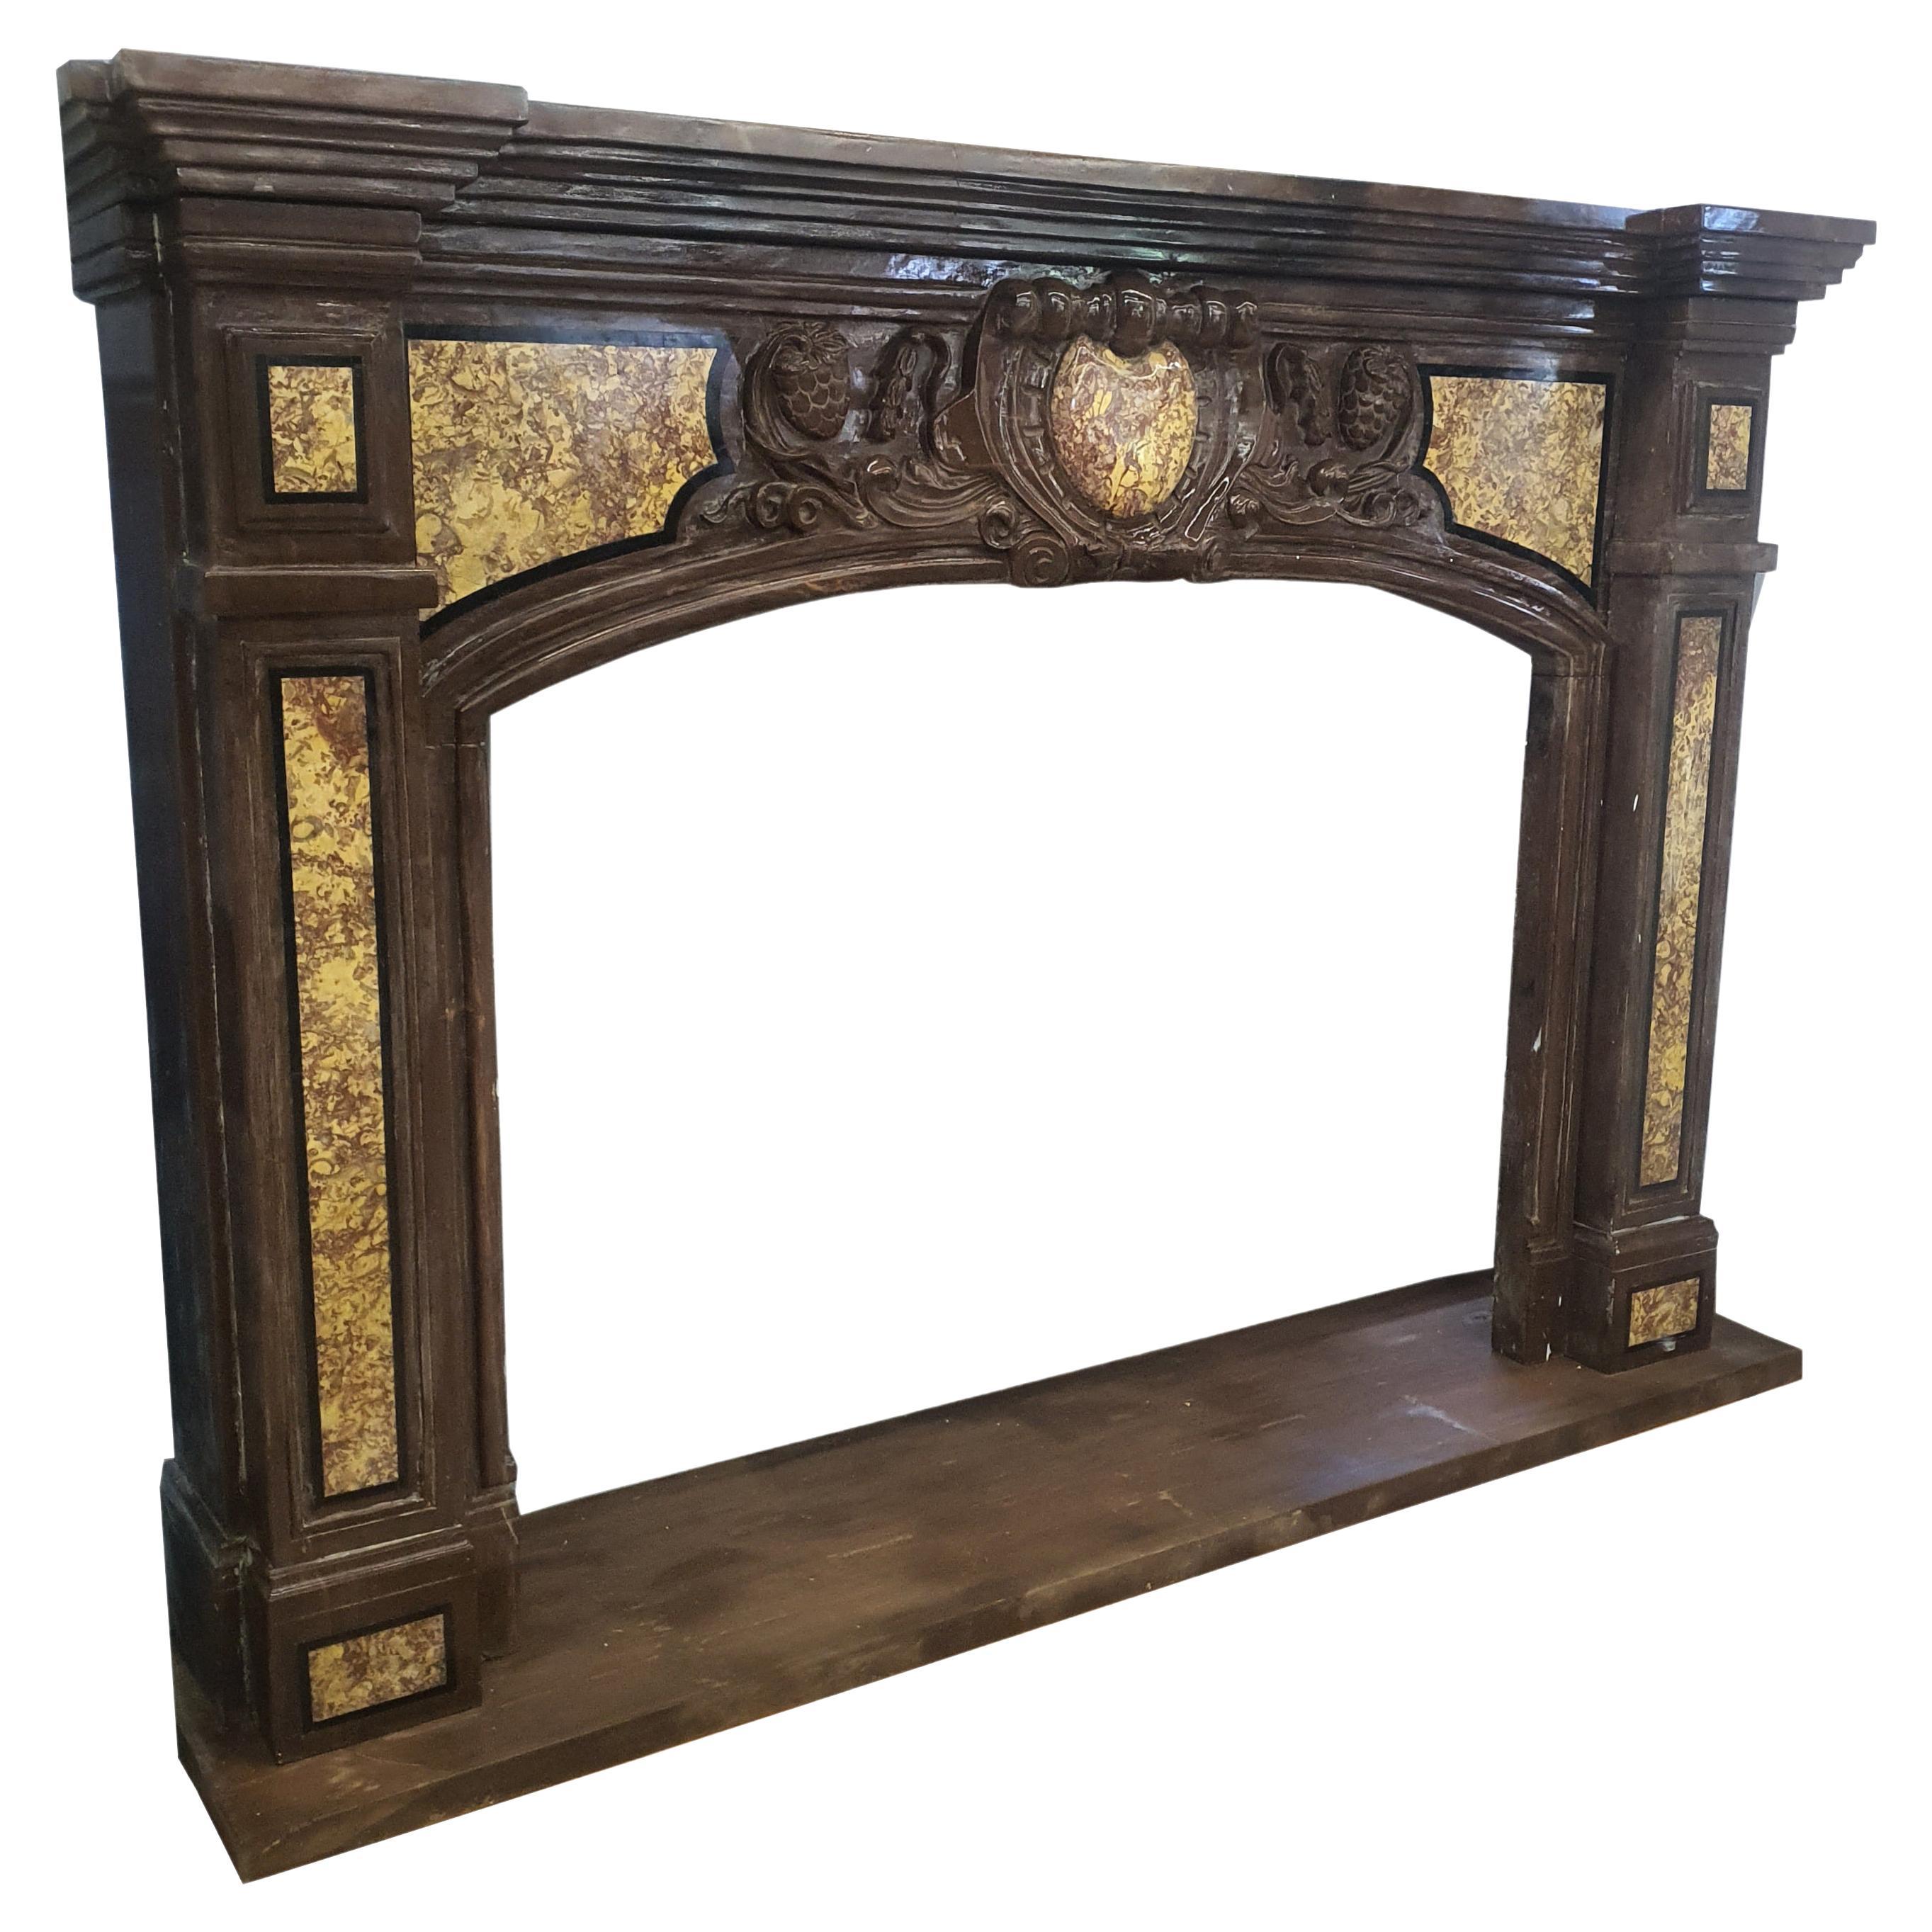 19th Century, Italian Marble Fireplace, Brocatelle from Spain